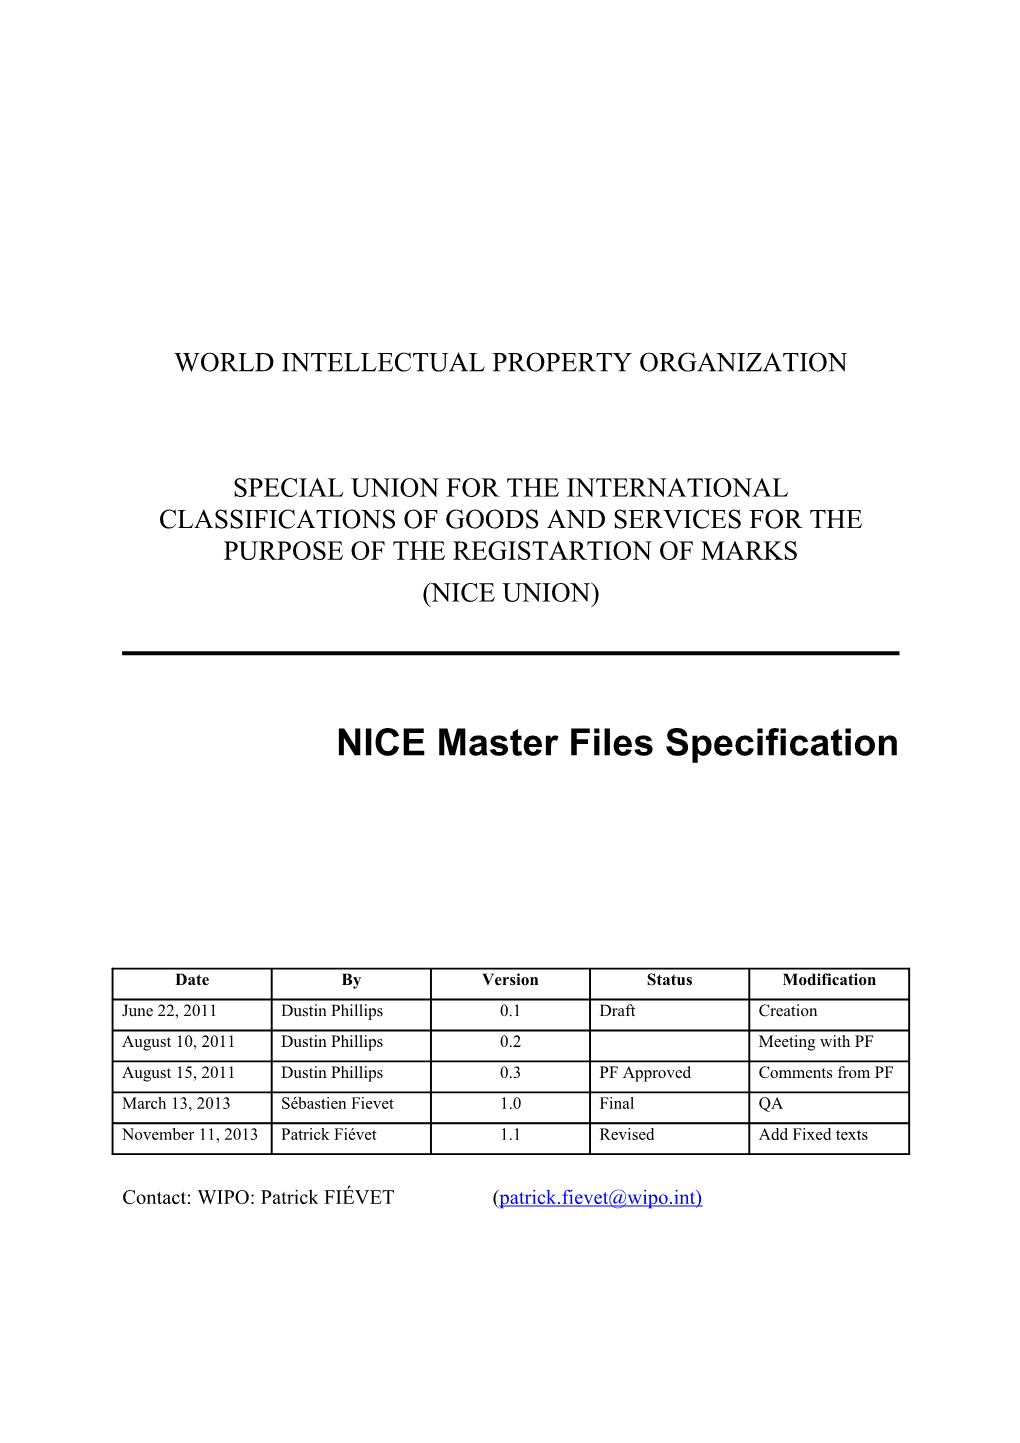 NICE Master Files Specification